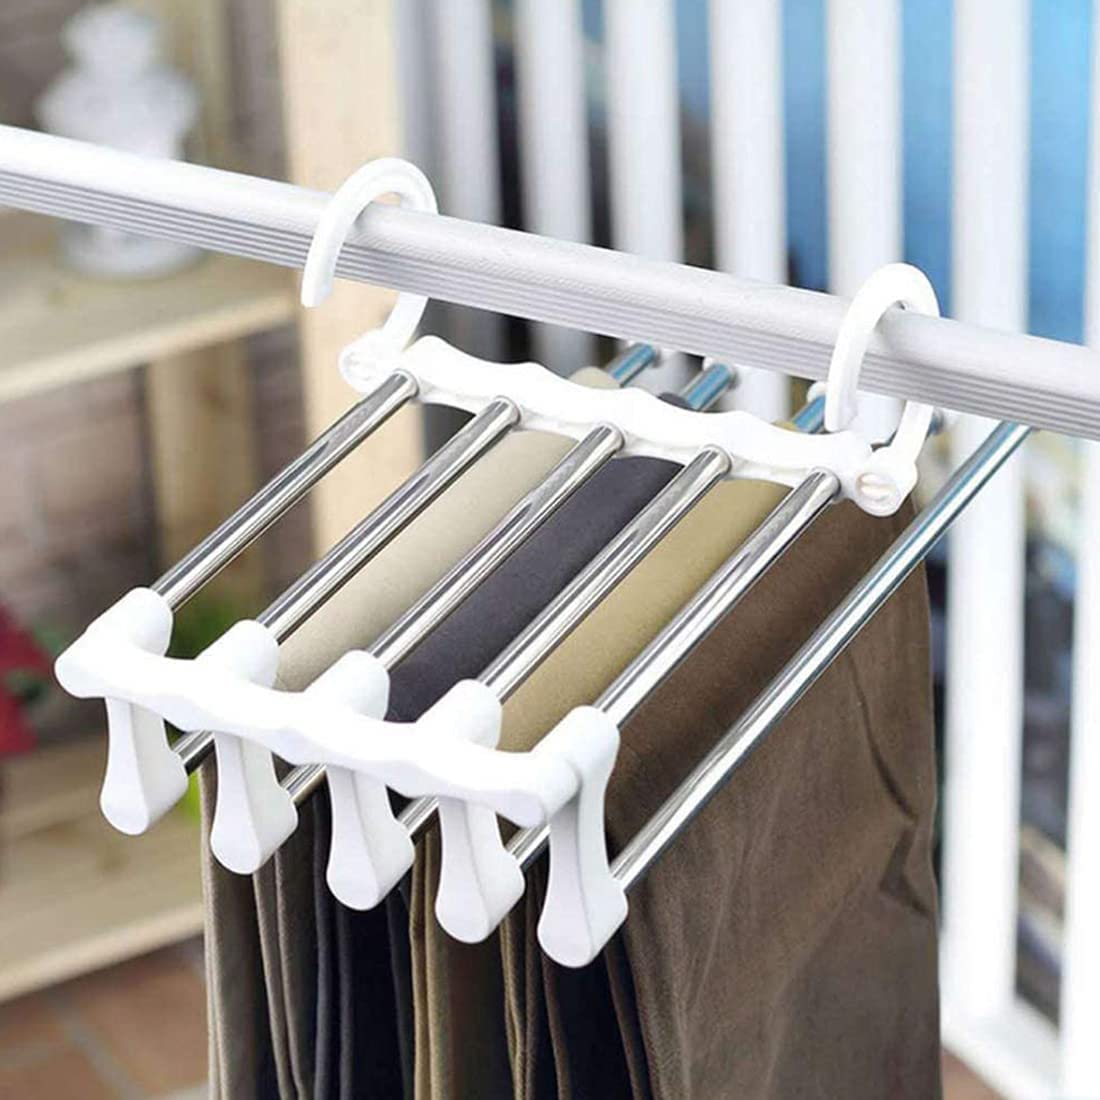 2 Pack Stainless Steel Adjustable 5 in 1 Pants Hangers Non-Slip Space Saving for Home Storage | Auzzi Store